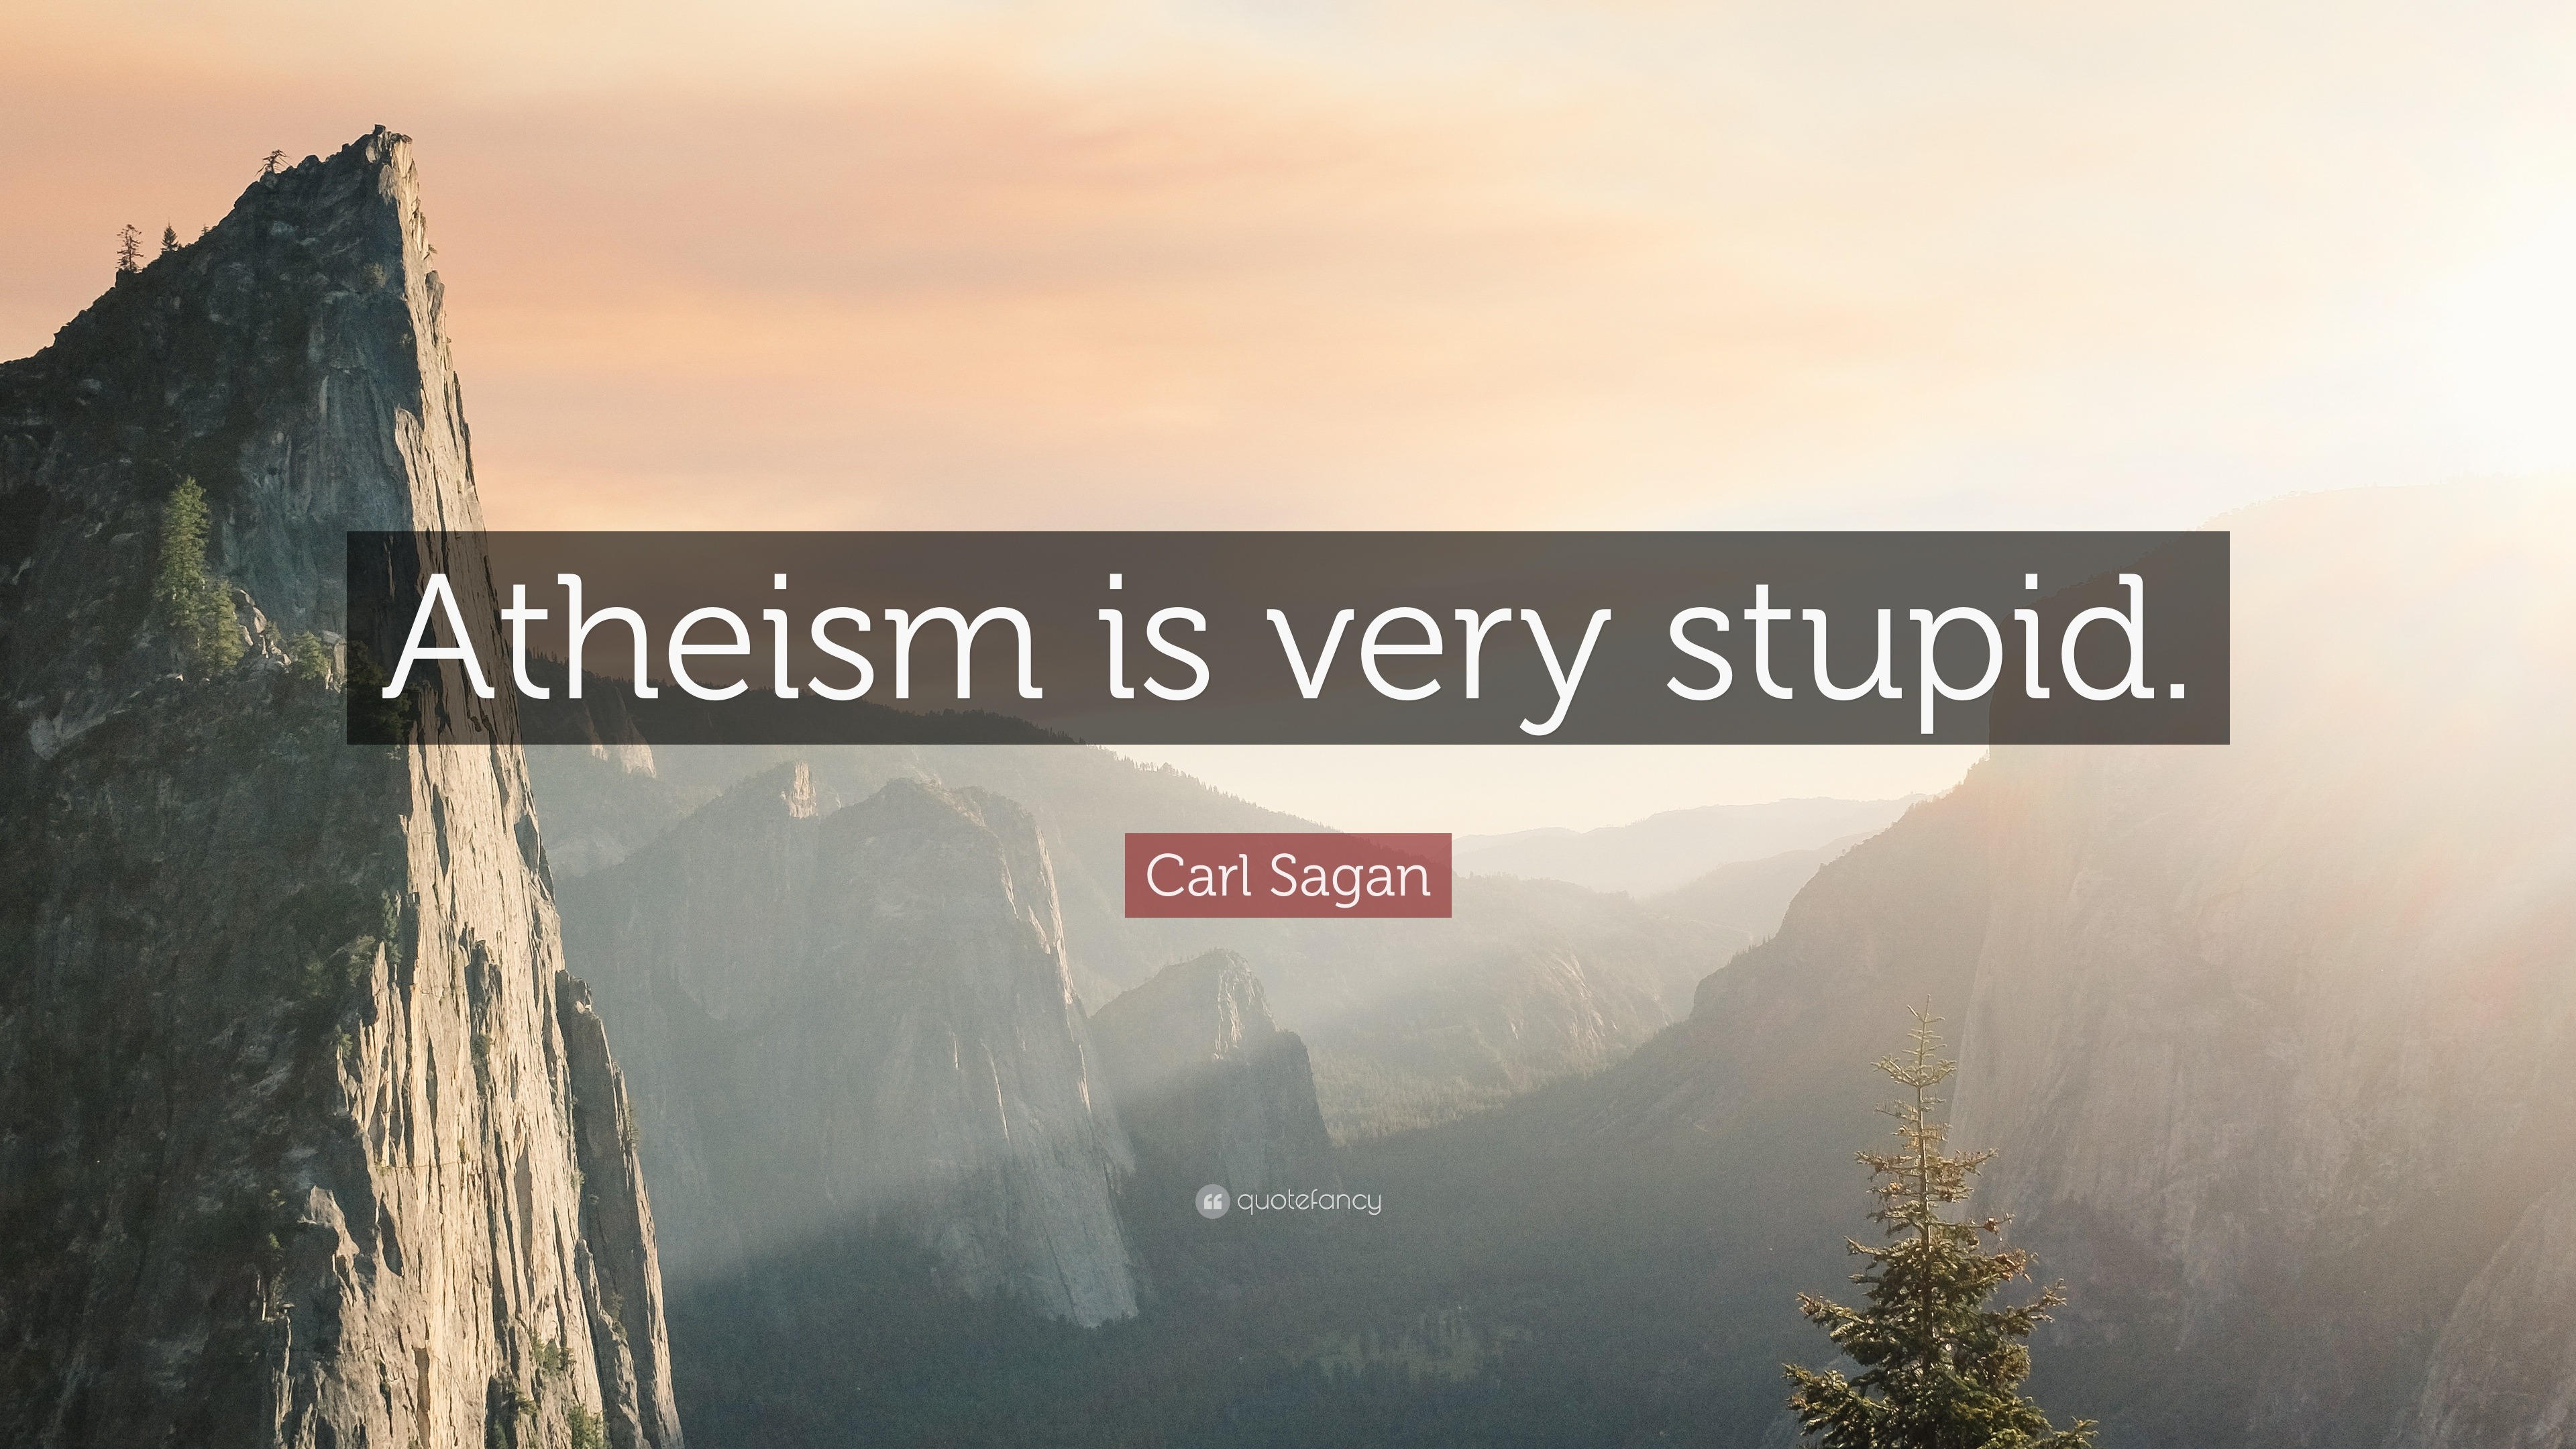 Carl Sagan Quote: “Atheism is very stupid.”